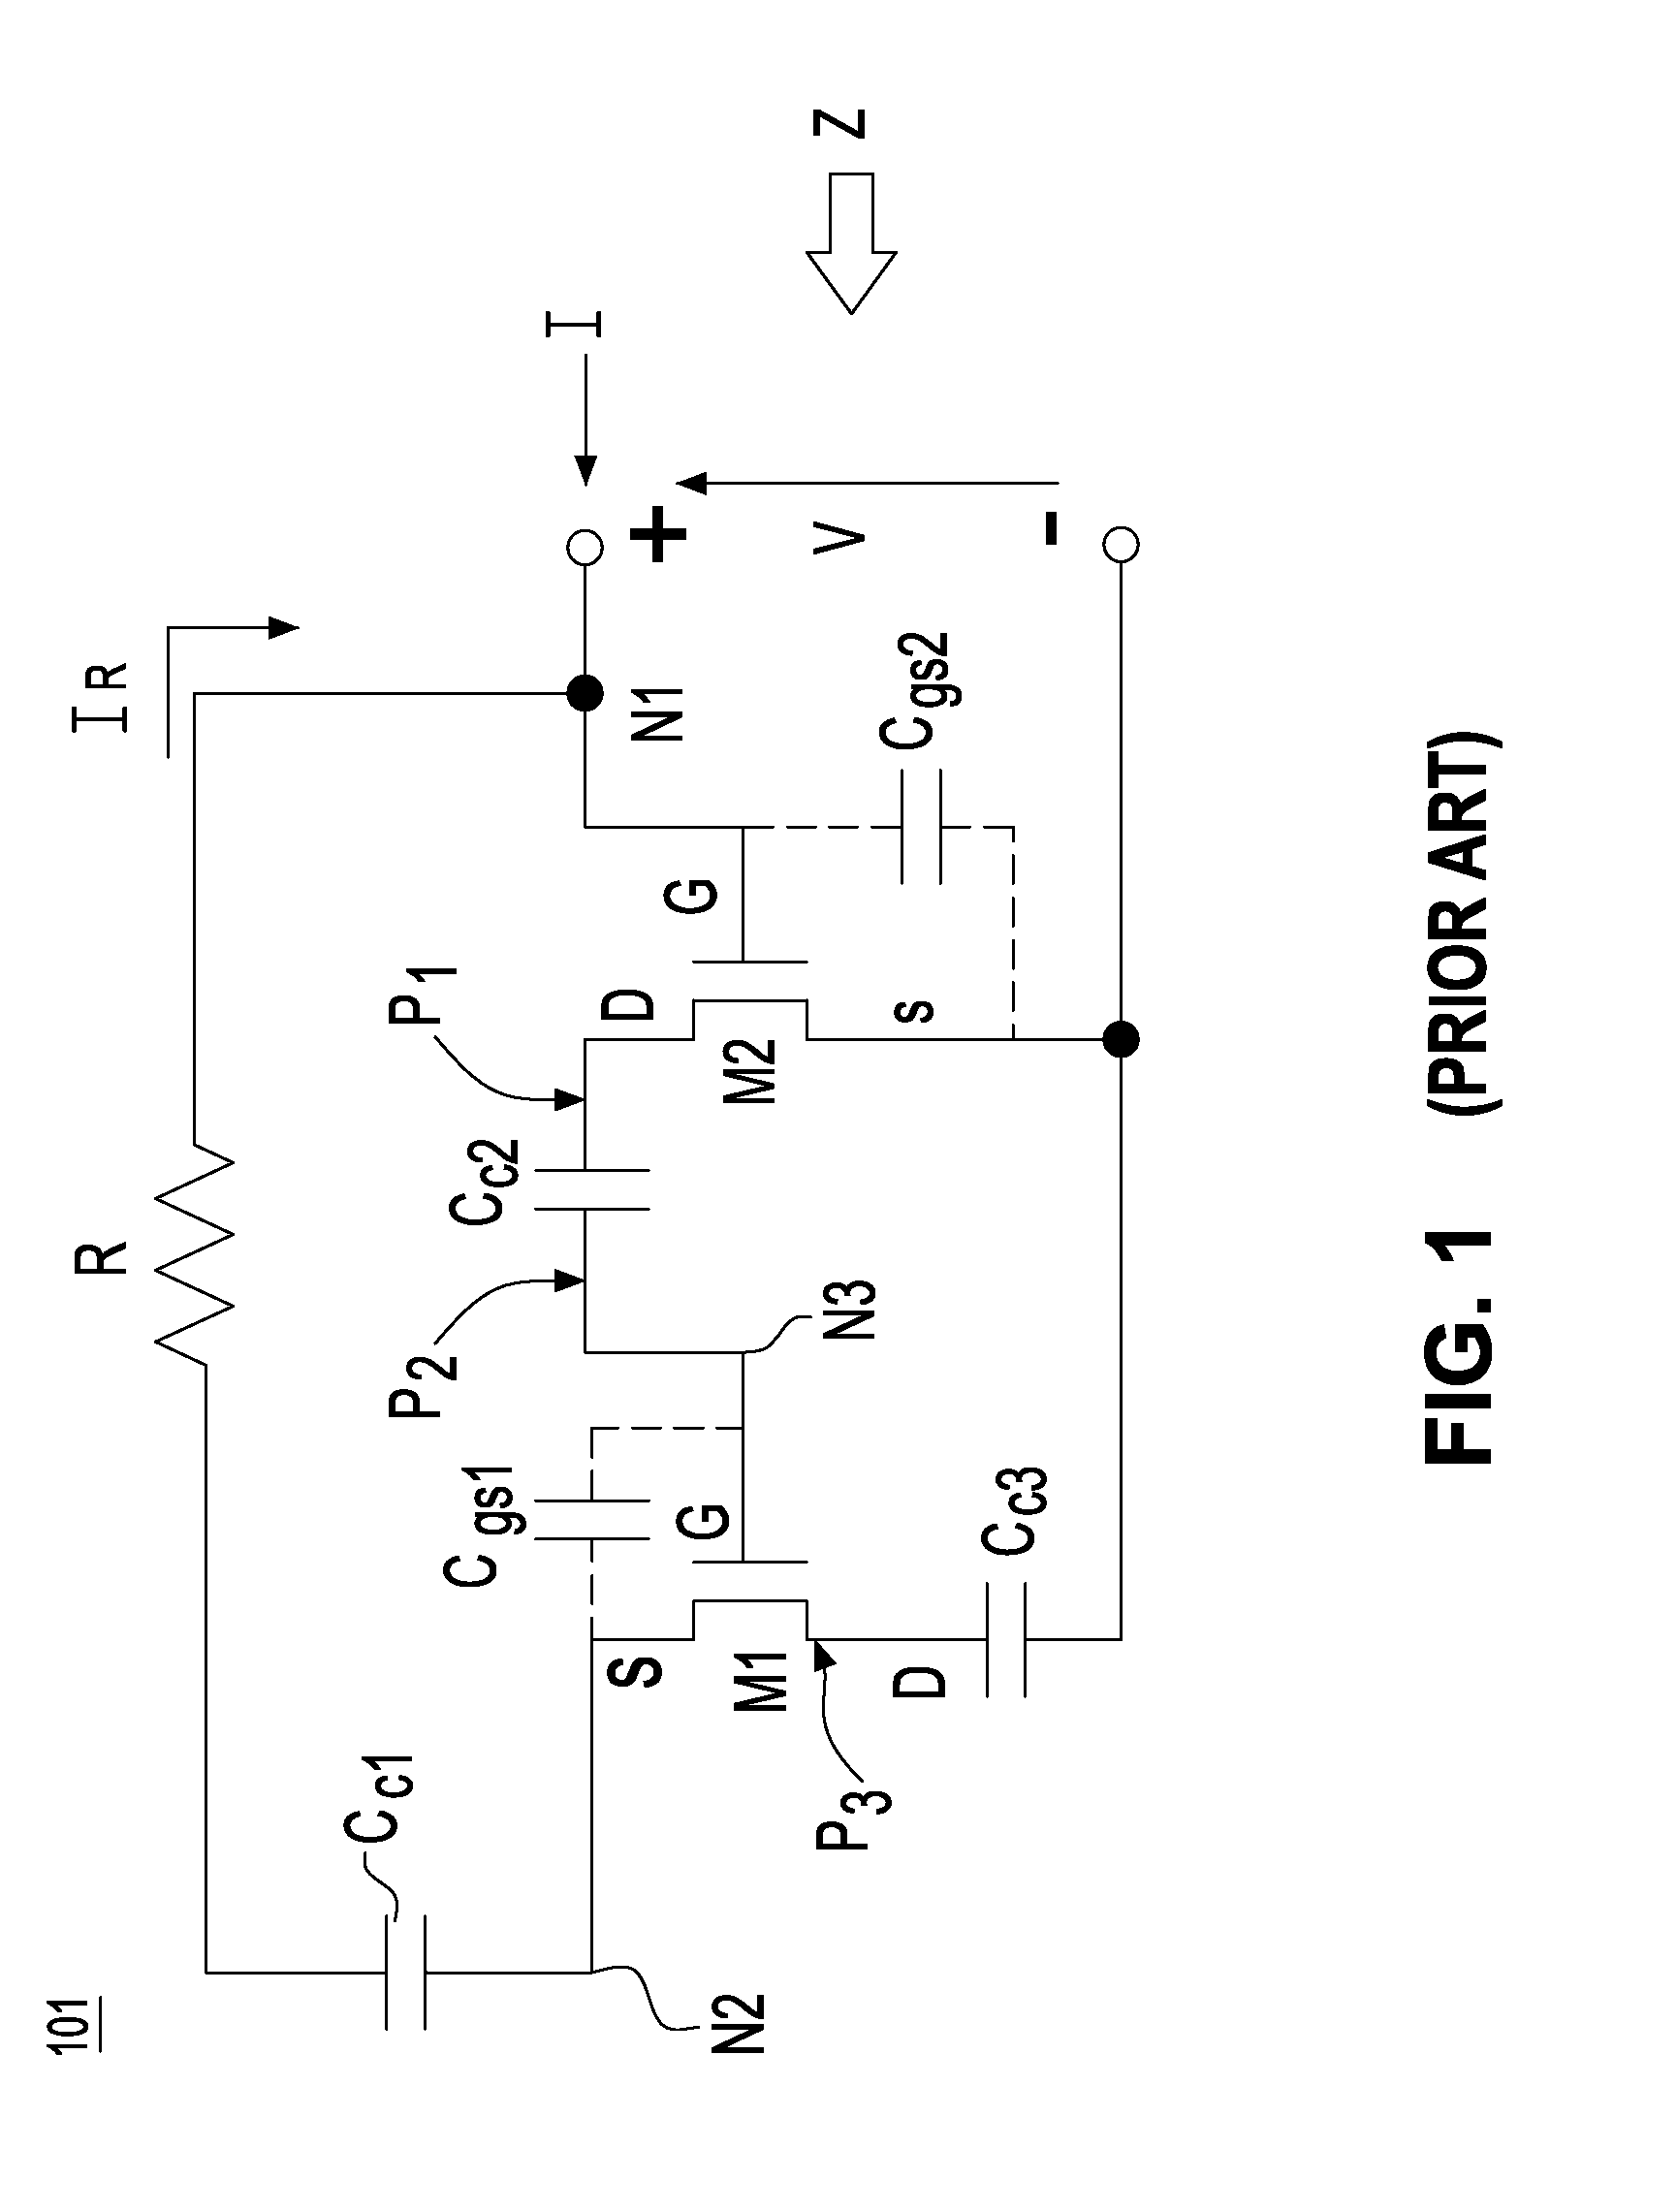 Active inductor for ASIC application